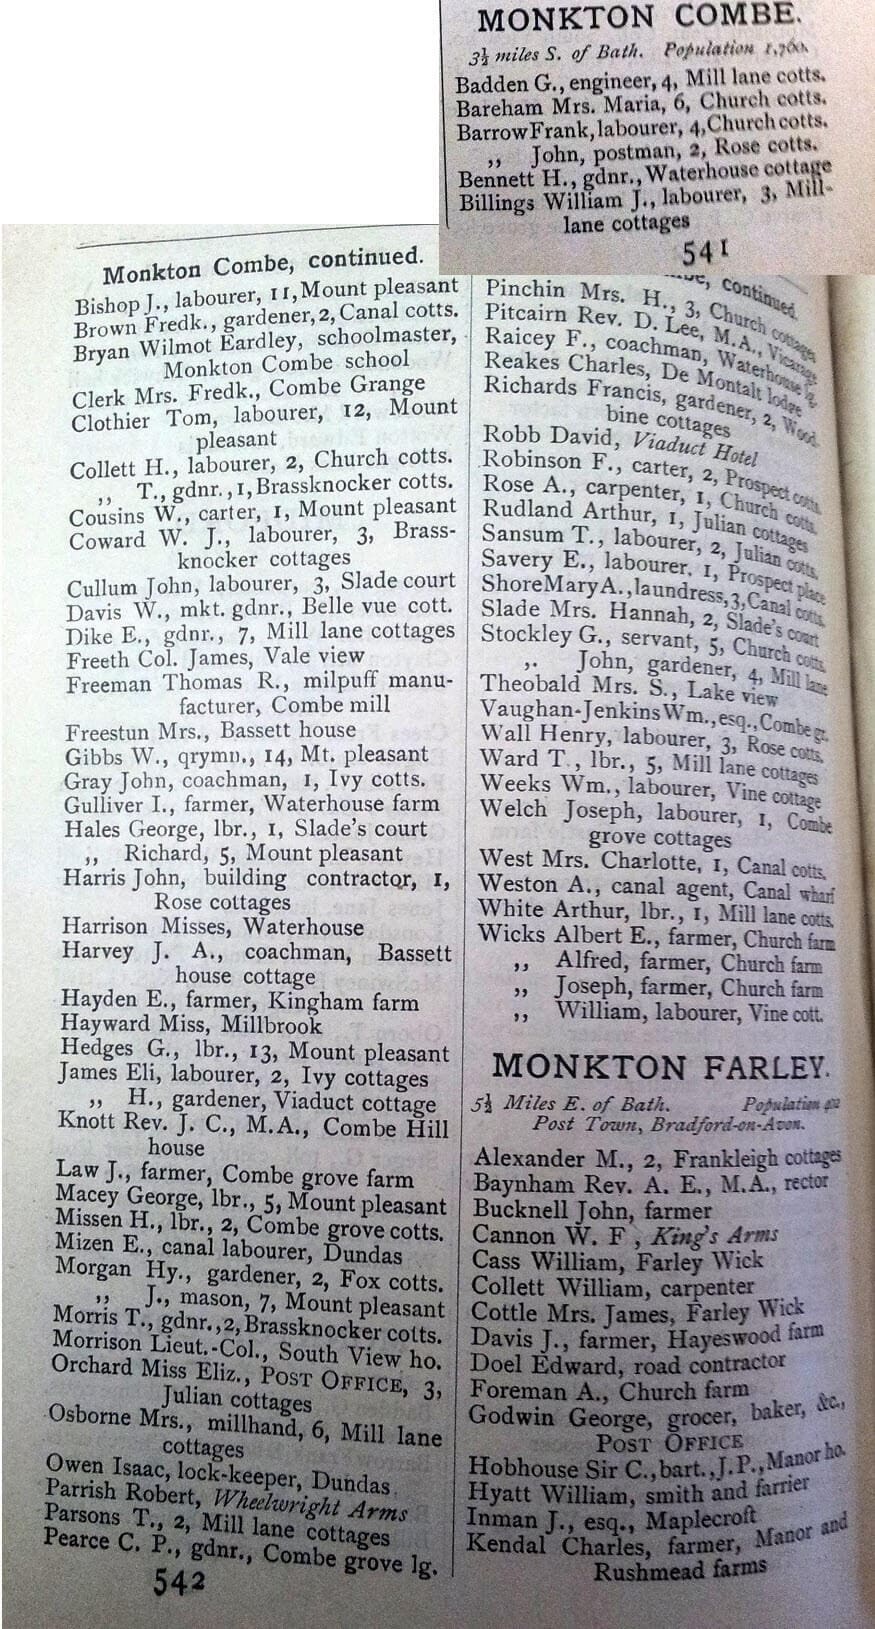 1896 Post Office Directory for Monkton Combe